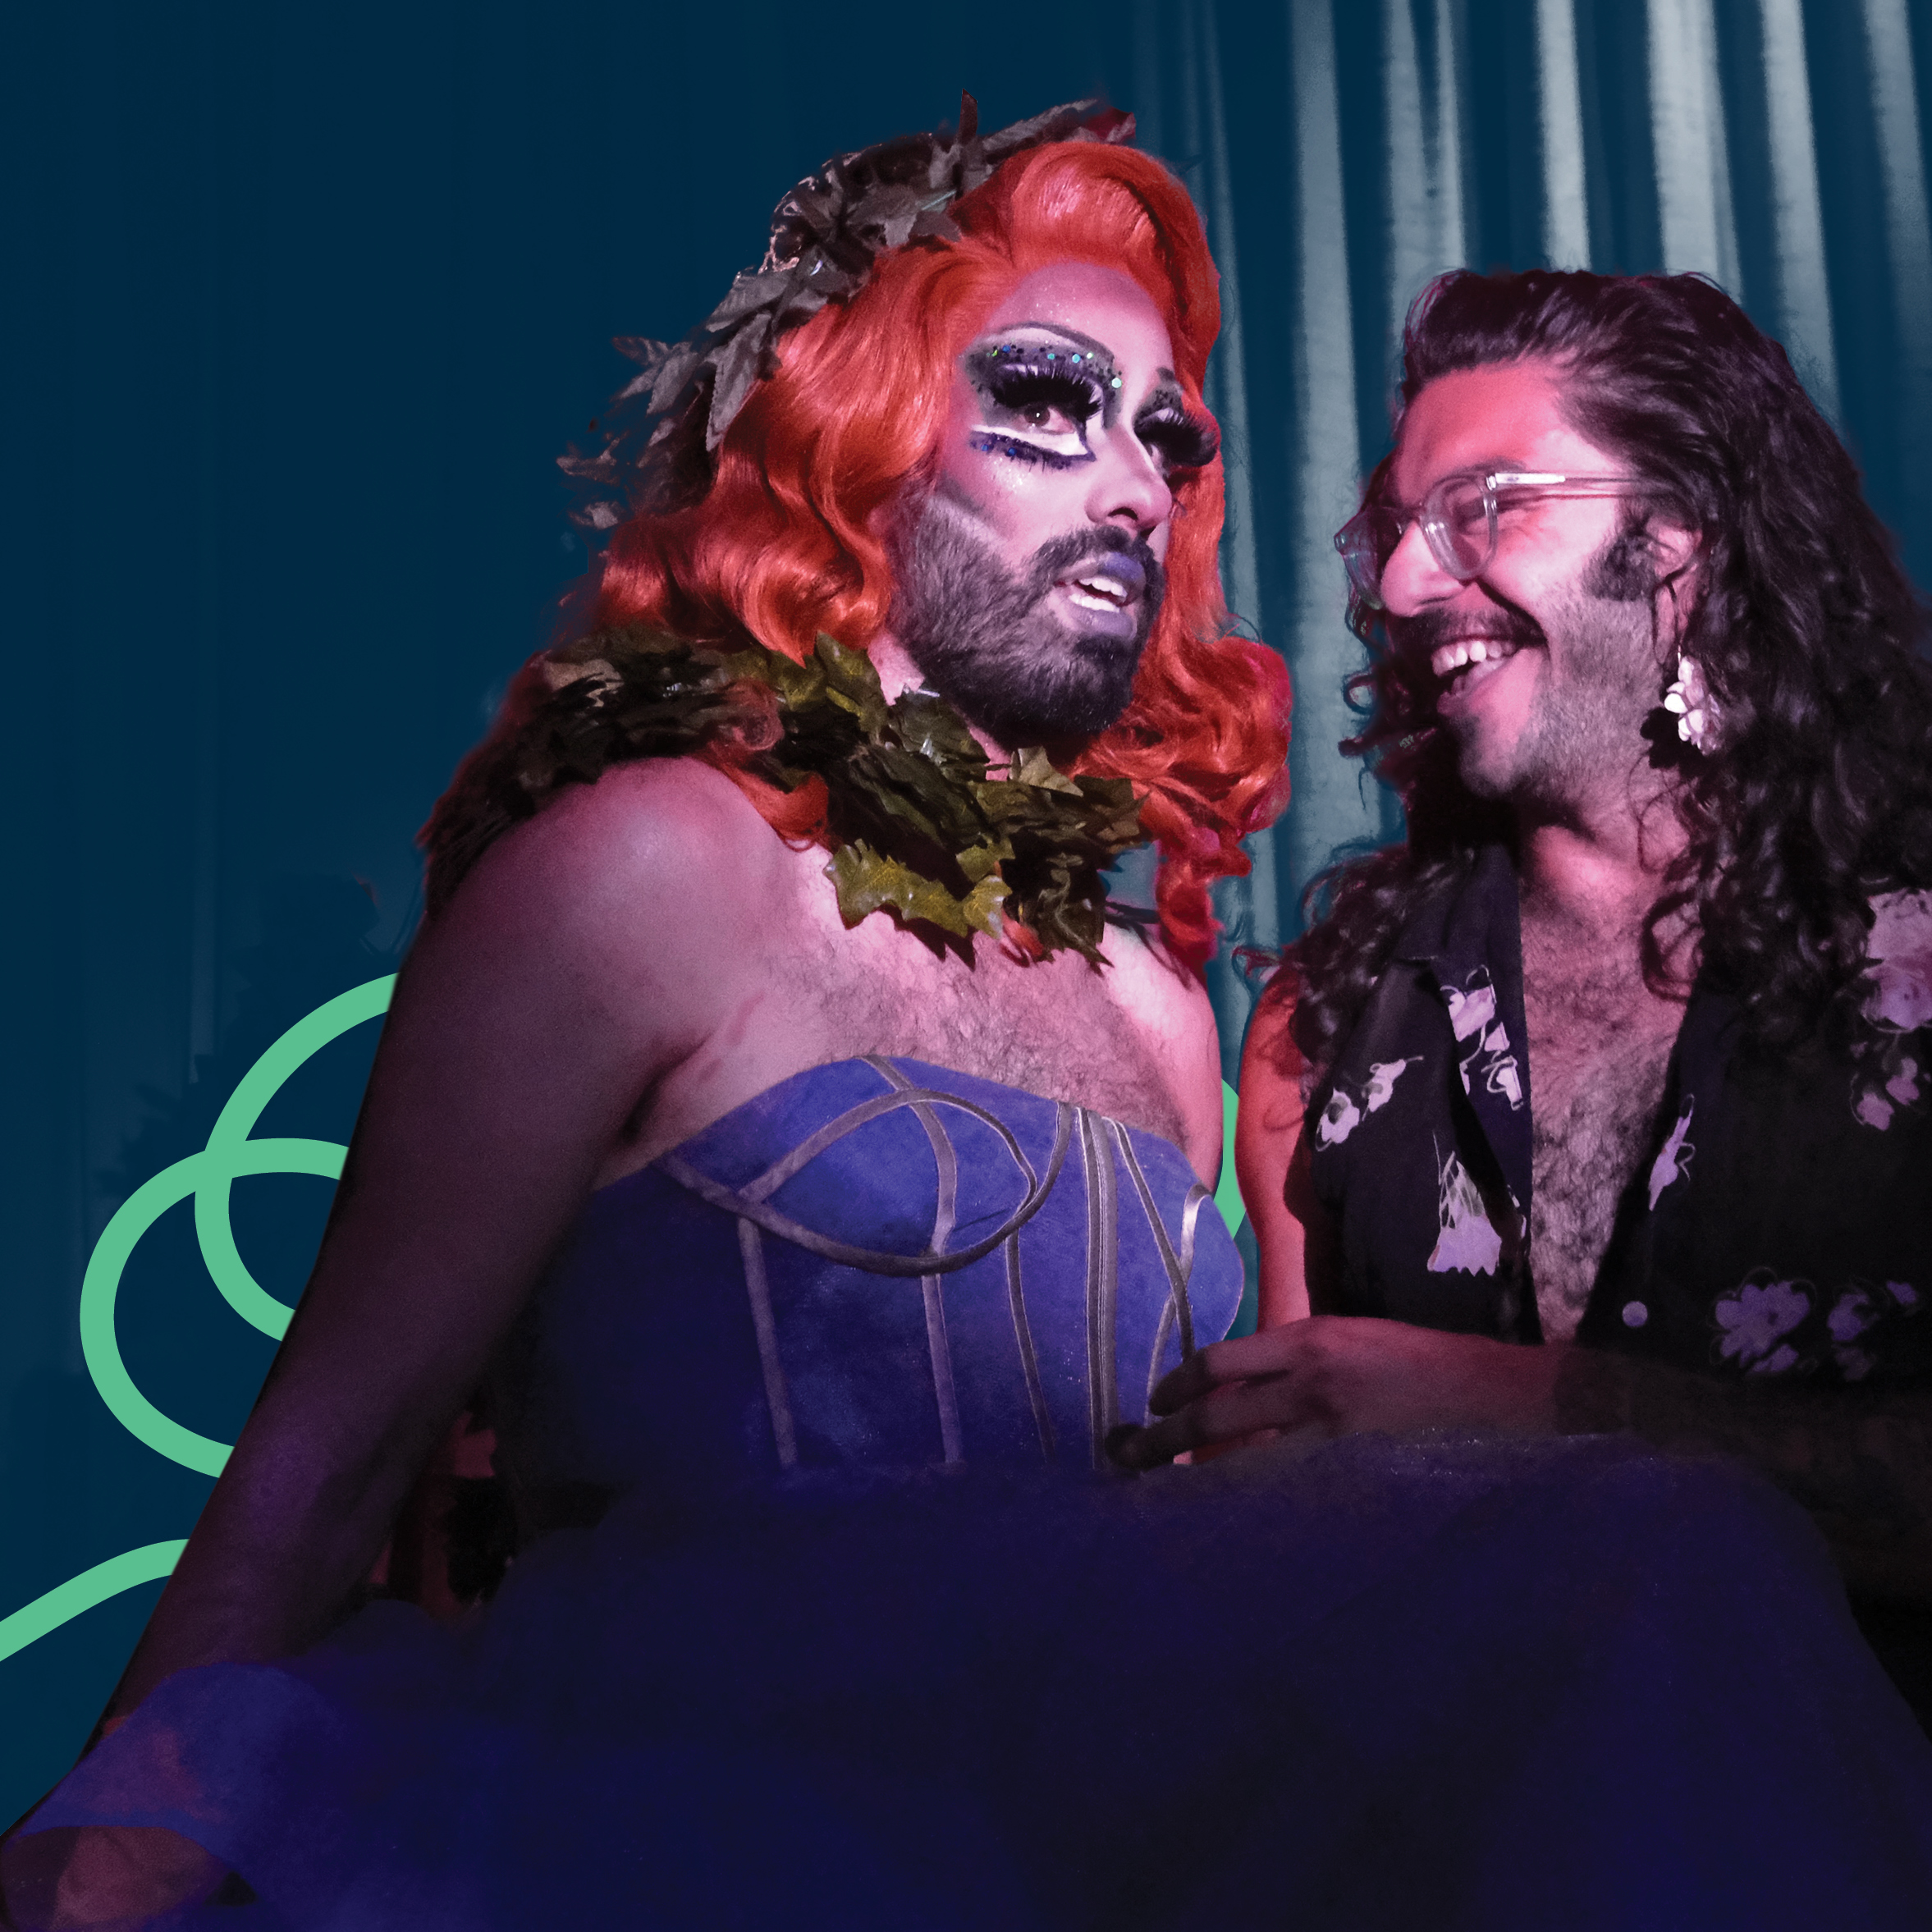 A drag queen with red hair, make-up, and denim top standing next to a smiling, bearded man with glasses and a flower shirt